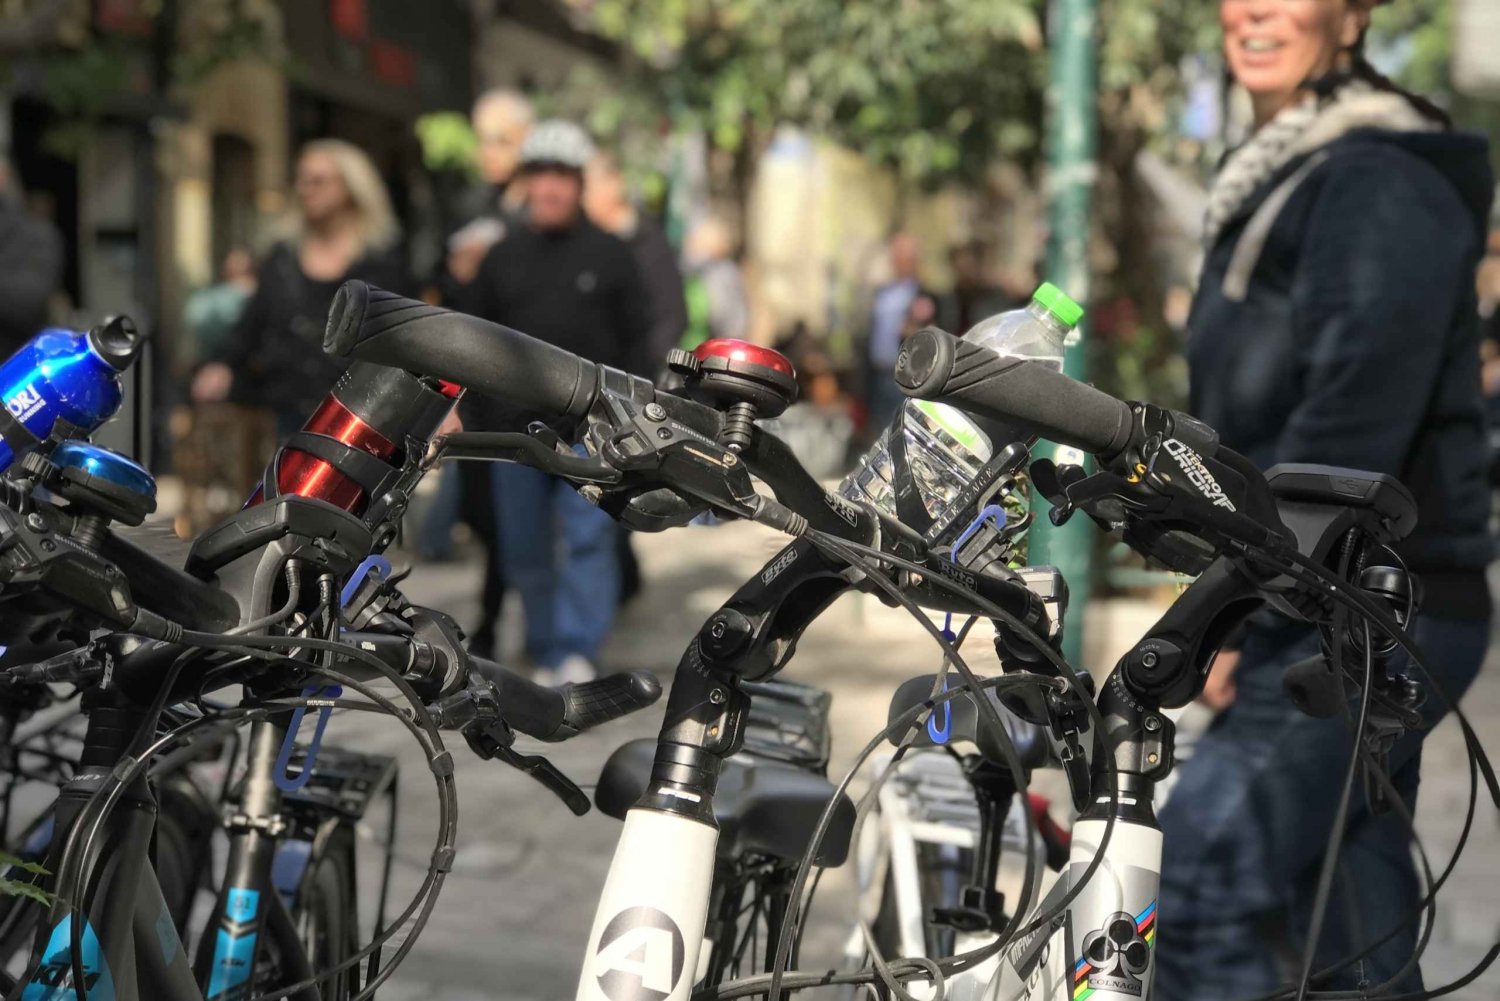 Athens: Sights and Food Tour on an Electric Bicycle